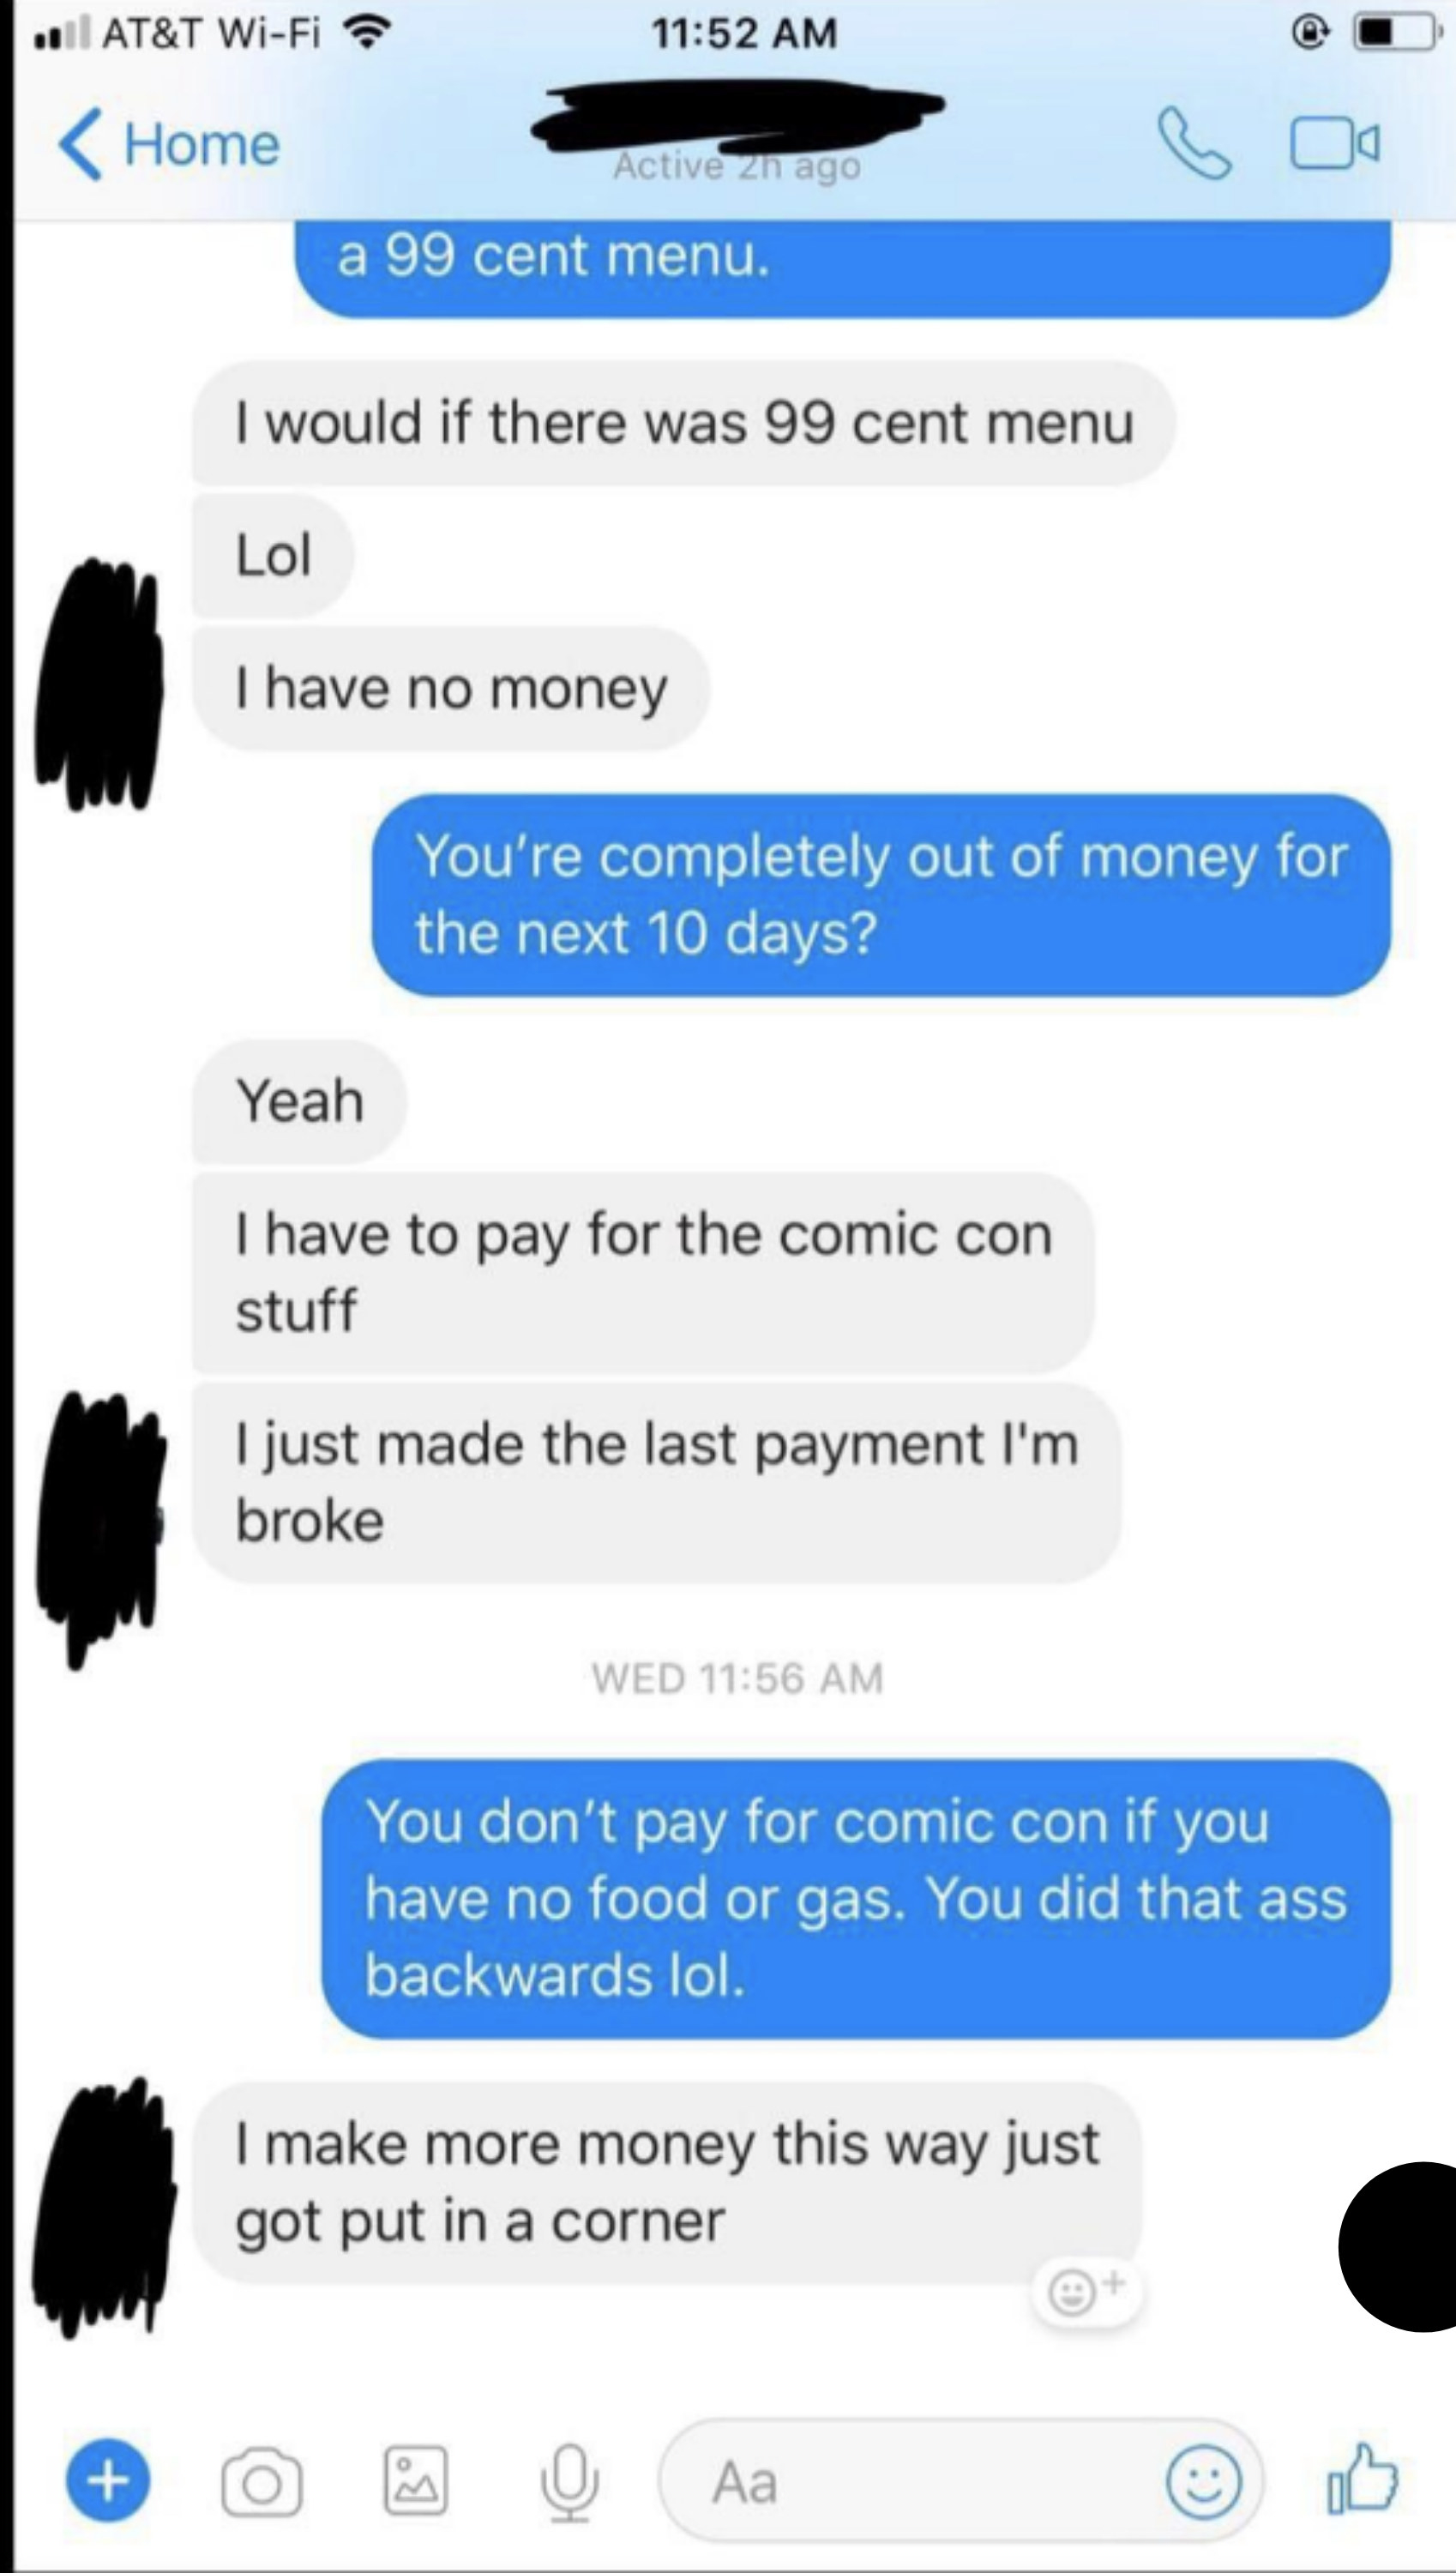 The person says they spent the money on Comic-Con tickets, and they&#x27;ll &quot;make more money this way, just got put in a corner&quot;